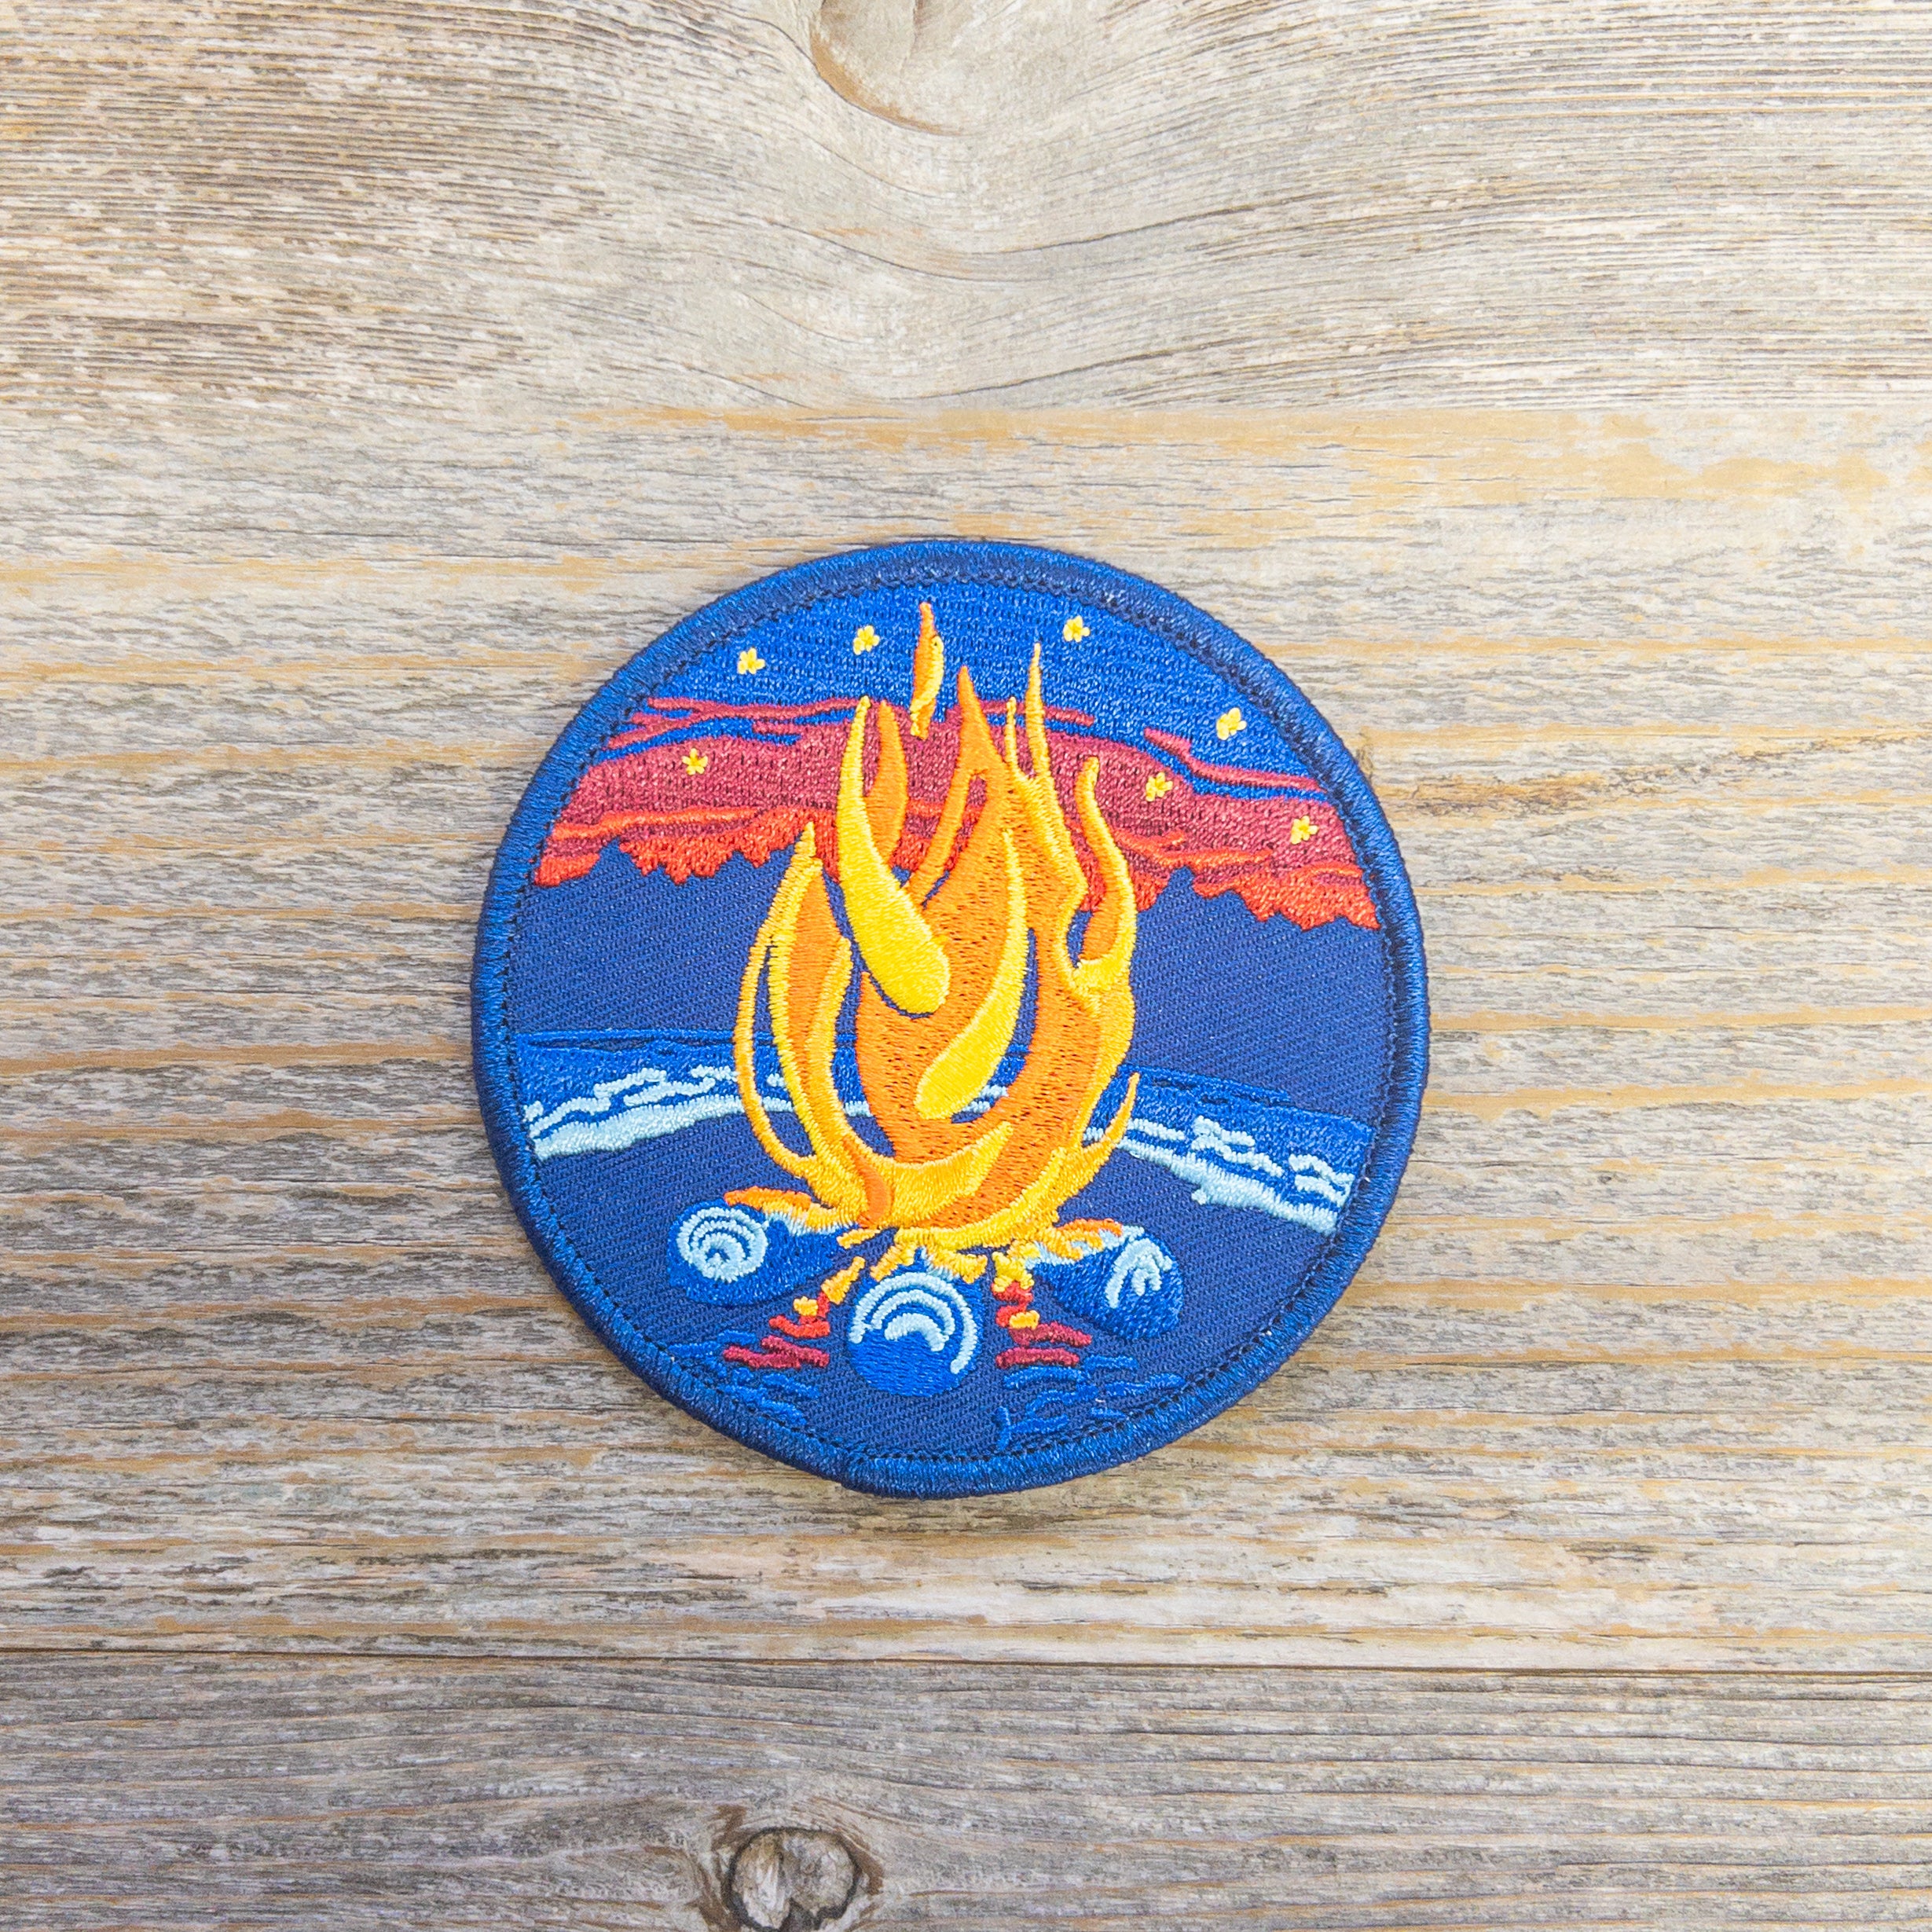 Bough & Antler “Campfire” Patch